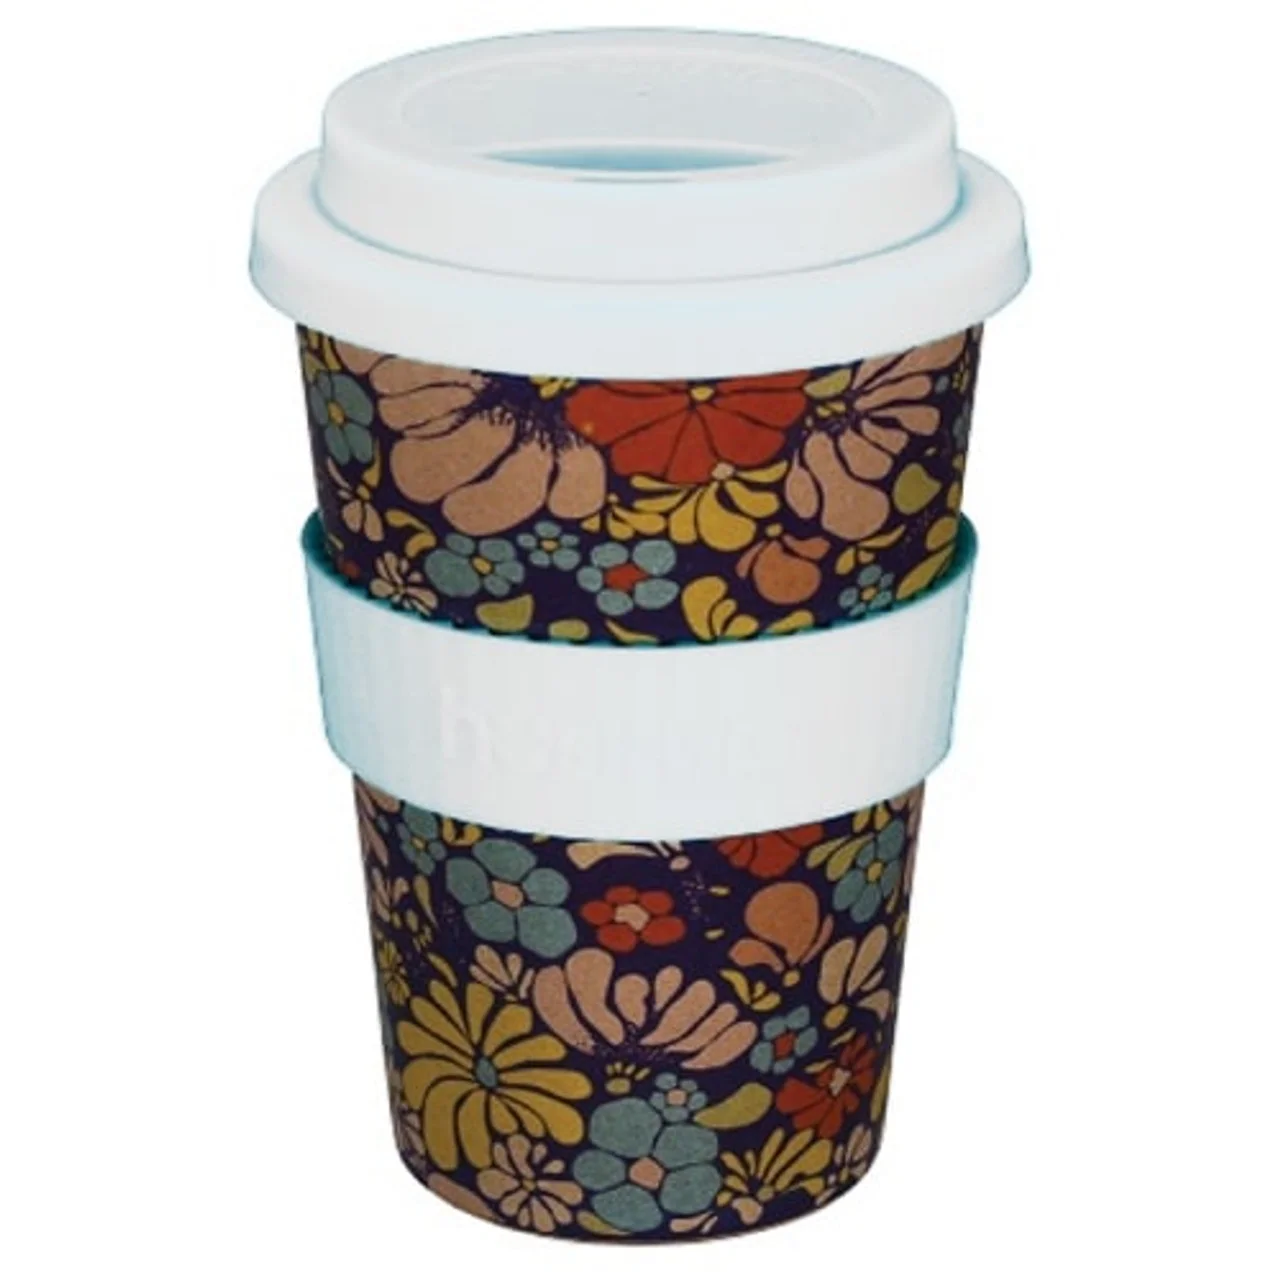 Huskup Flower Medley Rice Husk Cup | 12oz | White Lid and Sleeve